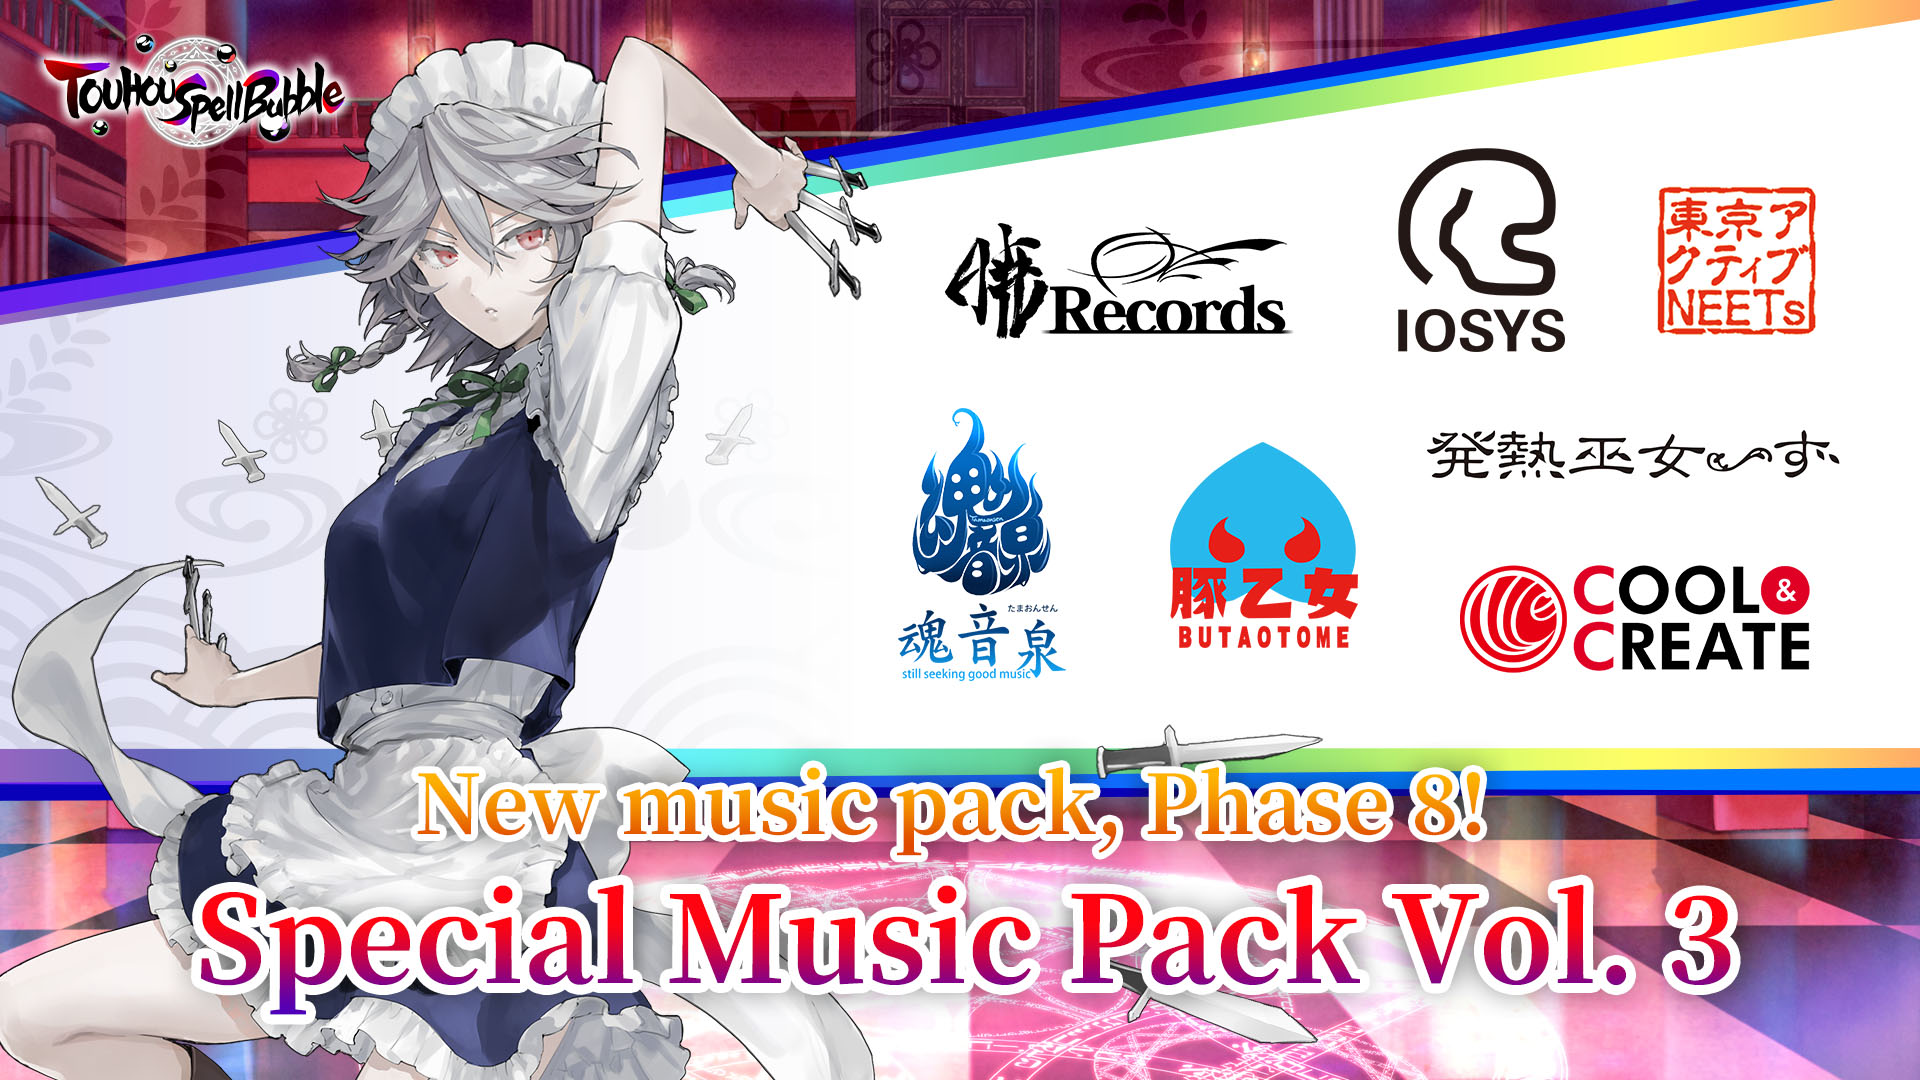 Special Music Pack Vol. 3